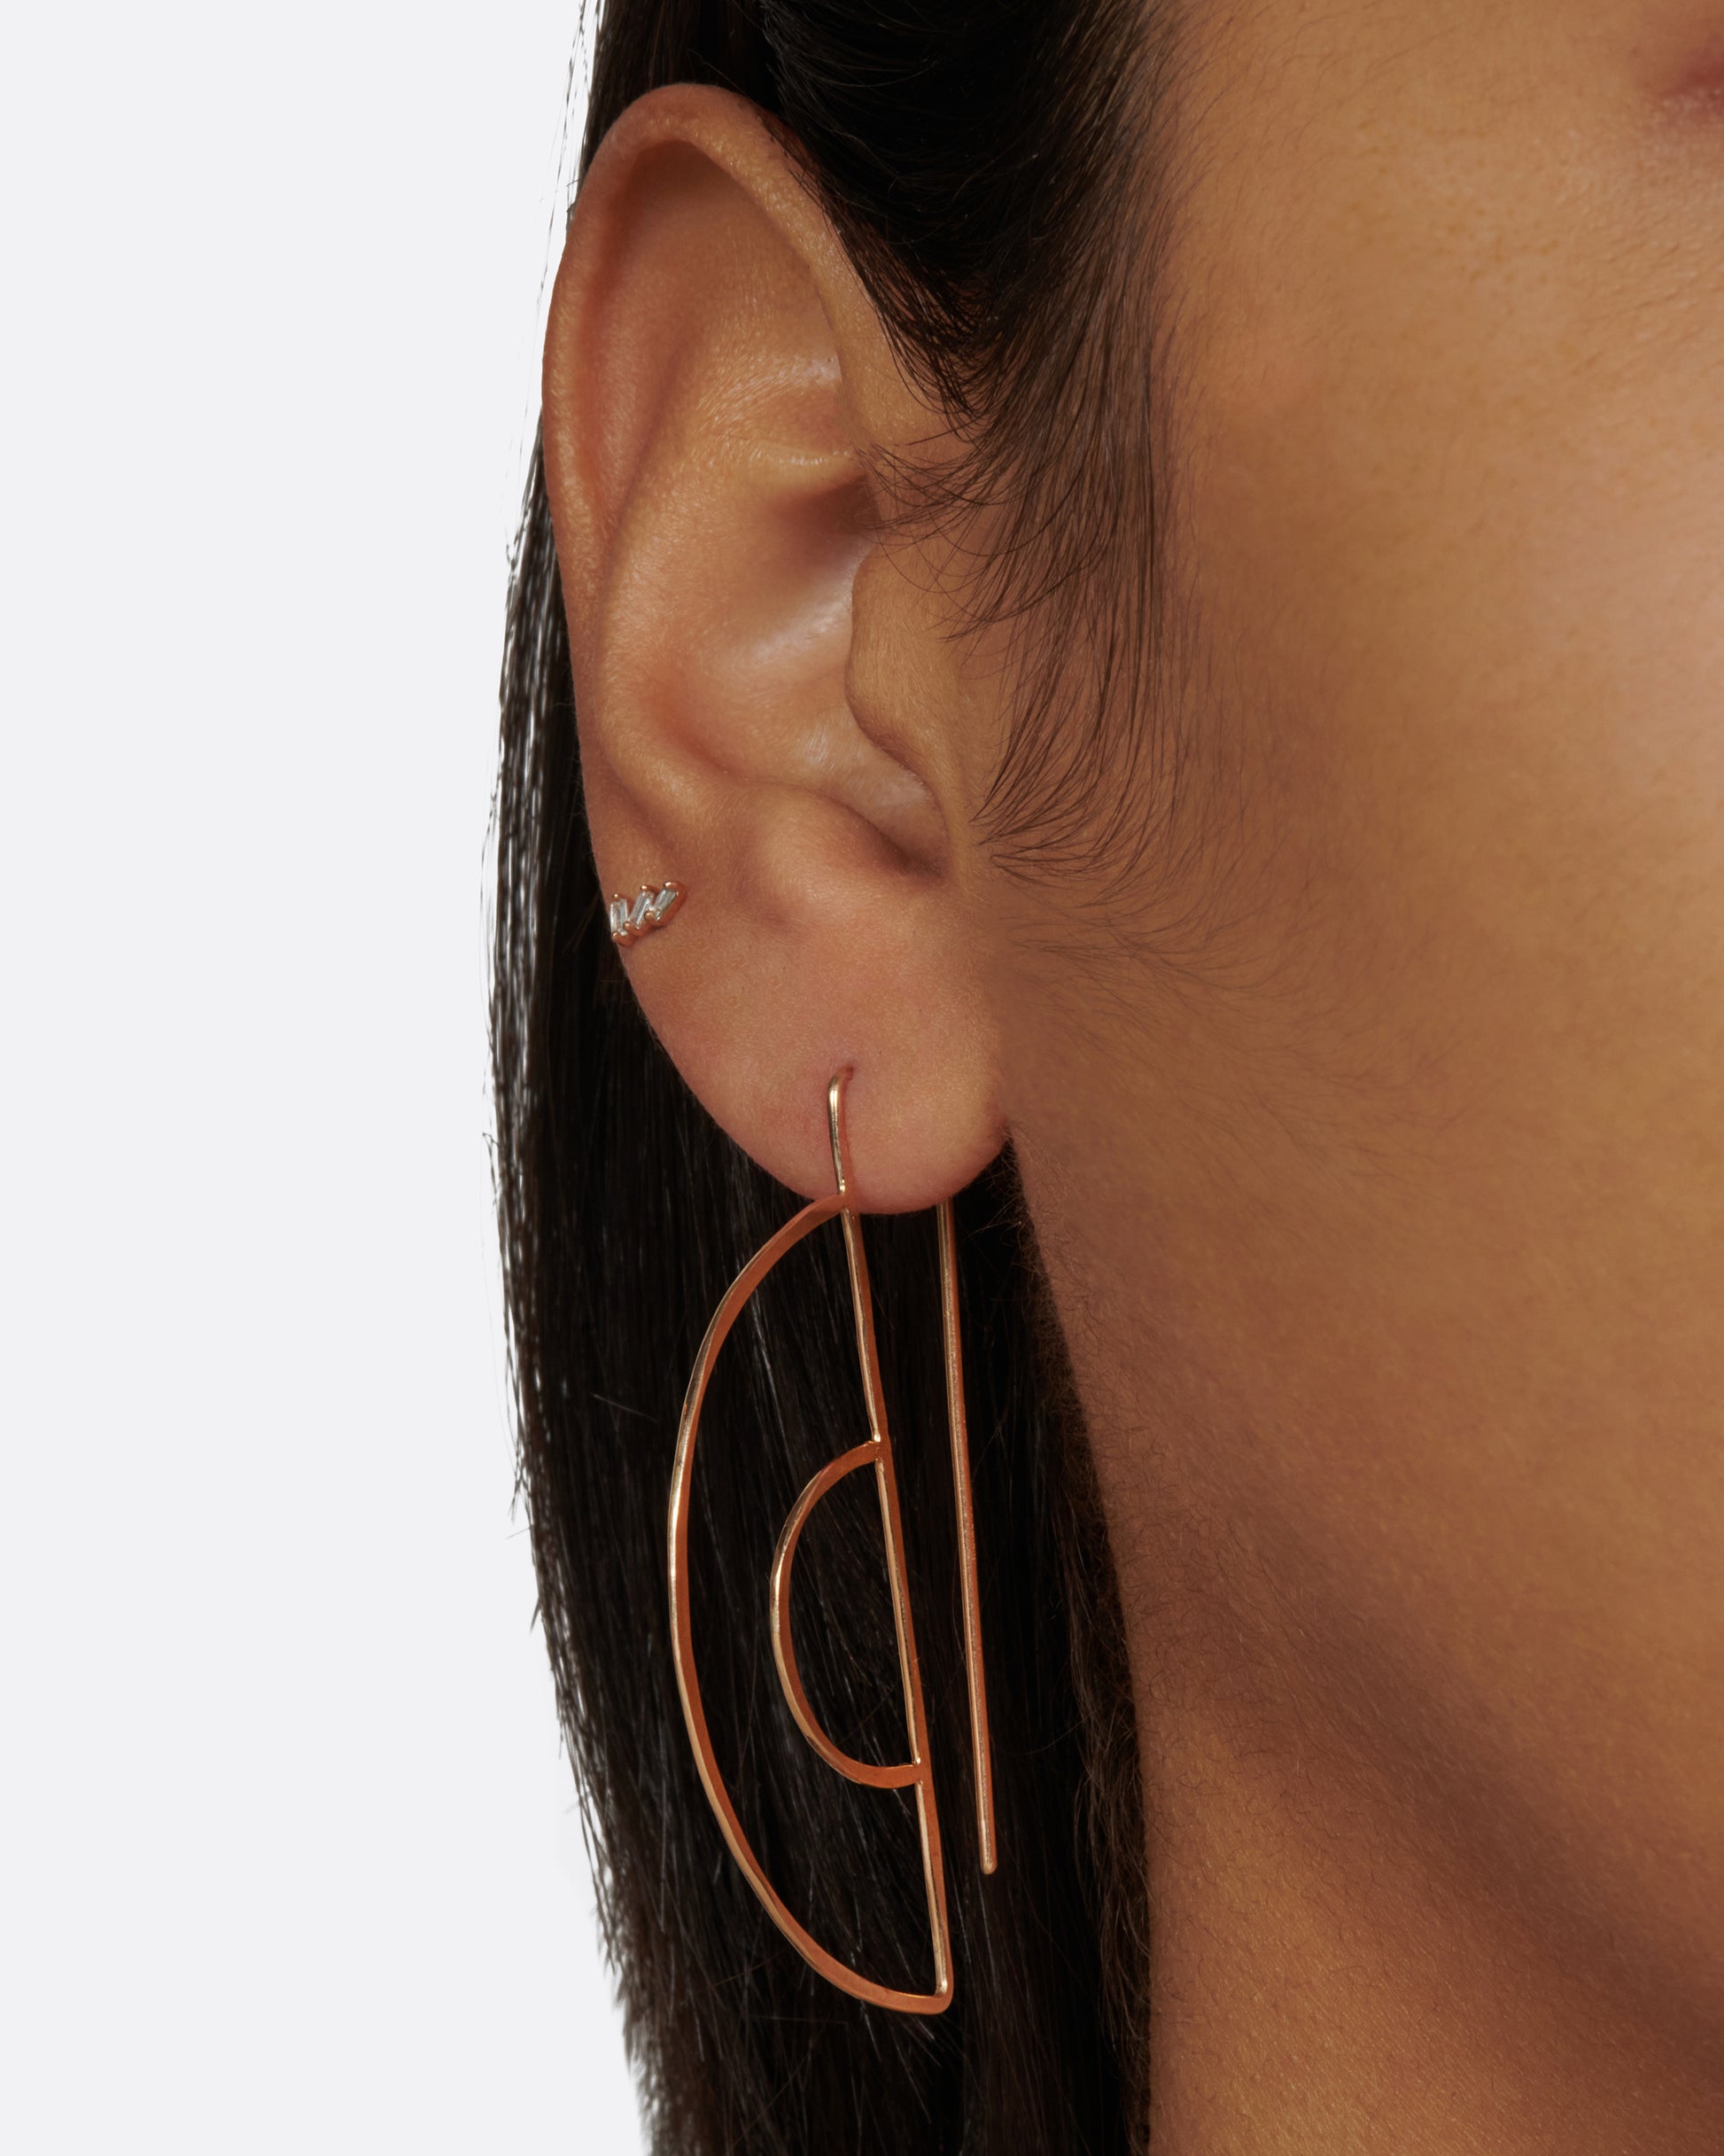 If you're looking for a delicate earring that still makes a statement - you've found it.